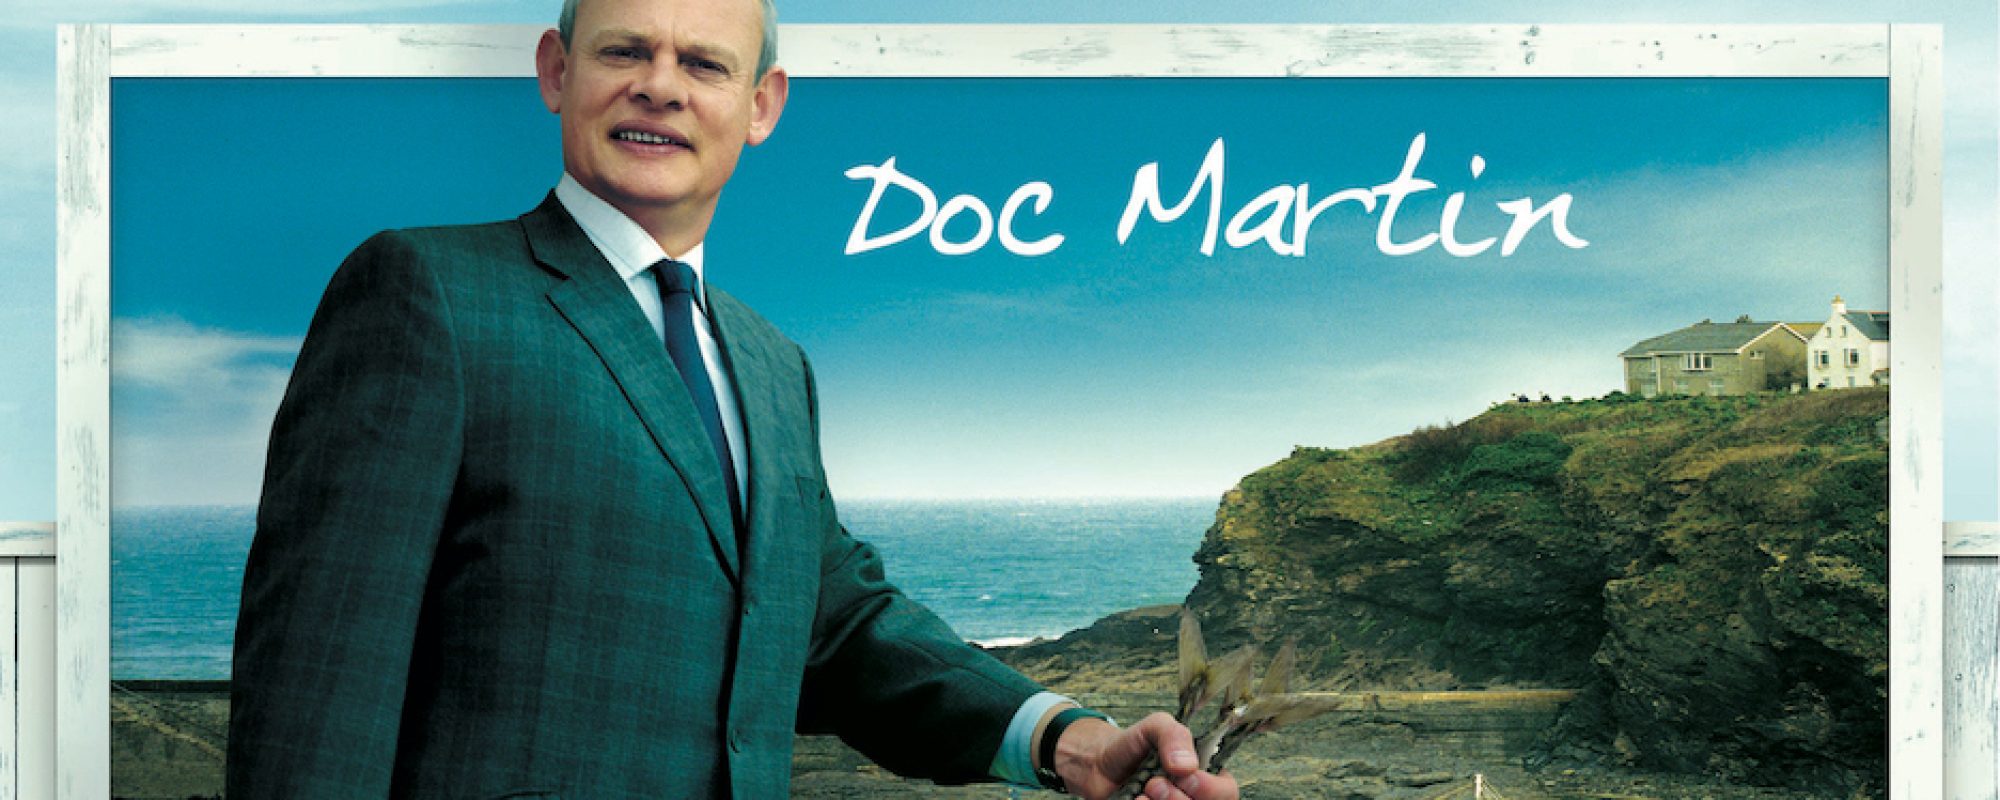 BELOVED BRITISH DRAMA SERIES DOC MARTIN IS COMING TO OVATION TV STARTING THURSDAY, DECEMBER 9